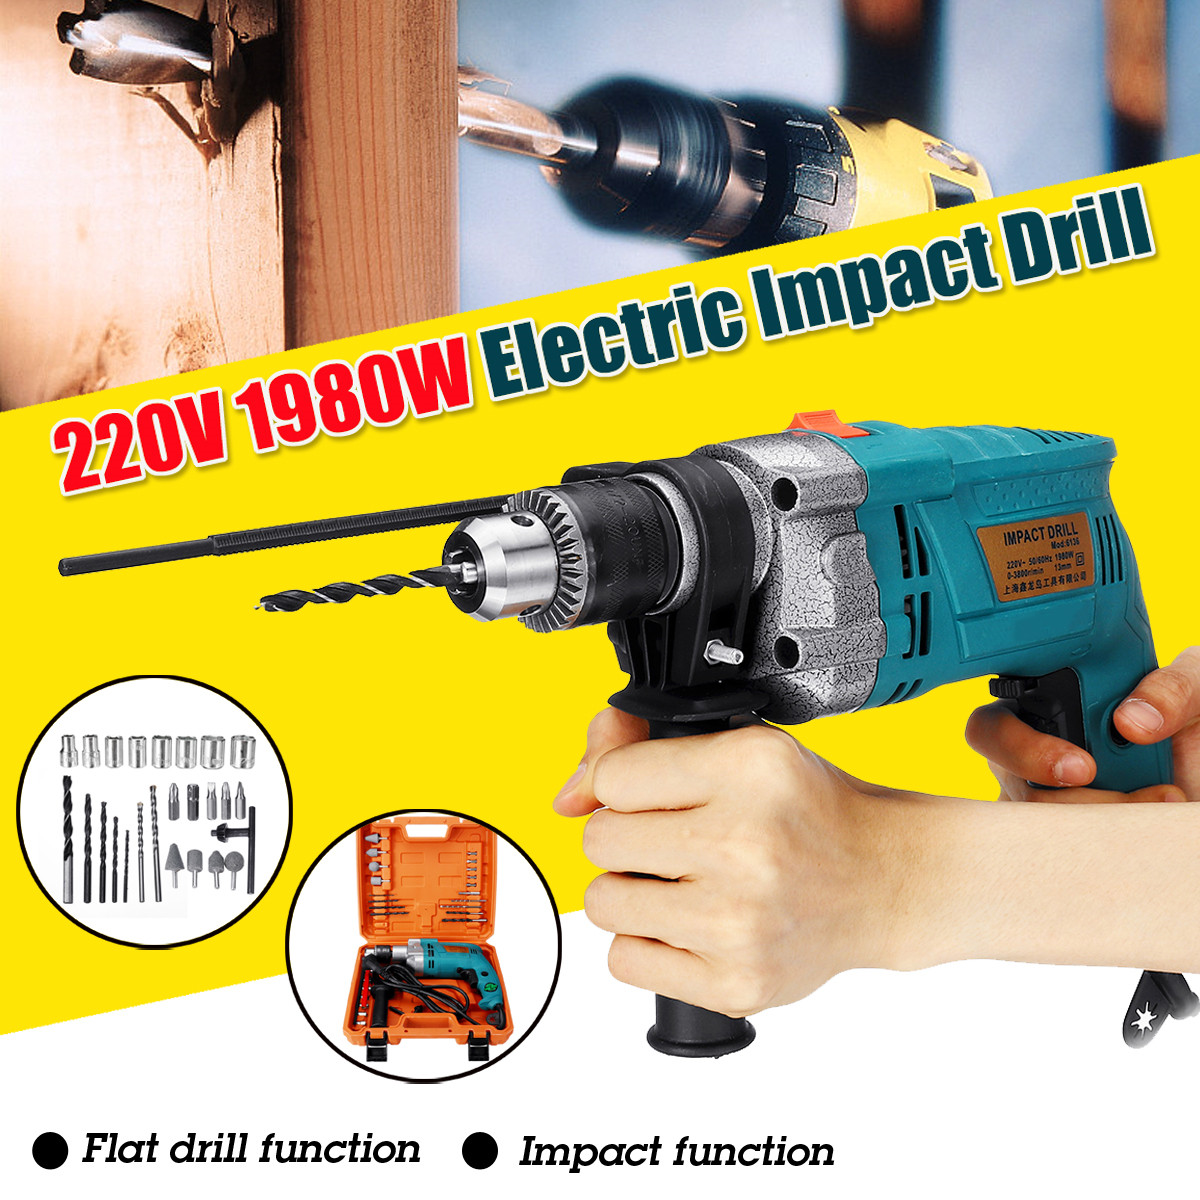 32Pcs-Set-1980W-3800RPM-Electric-Impact-Drill-Screwdriver-Household-Electric-Flat-Drill-Grinding-1466059-1